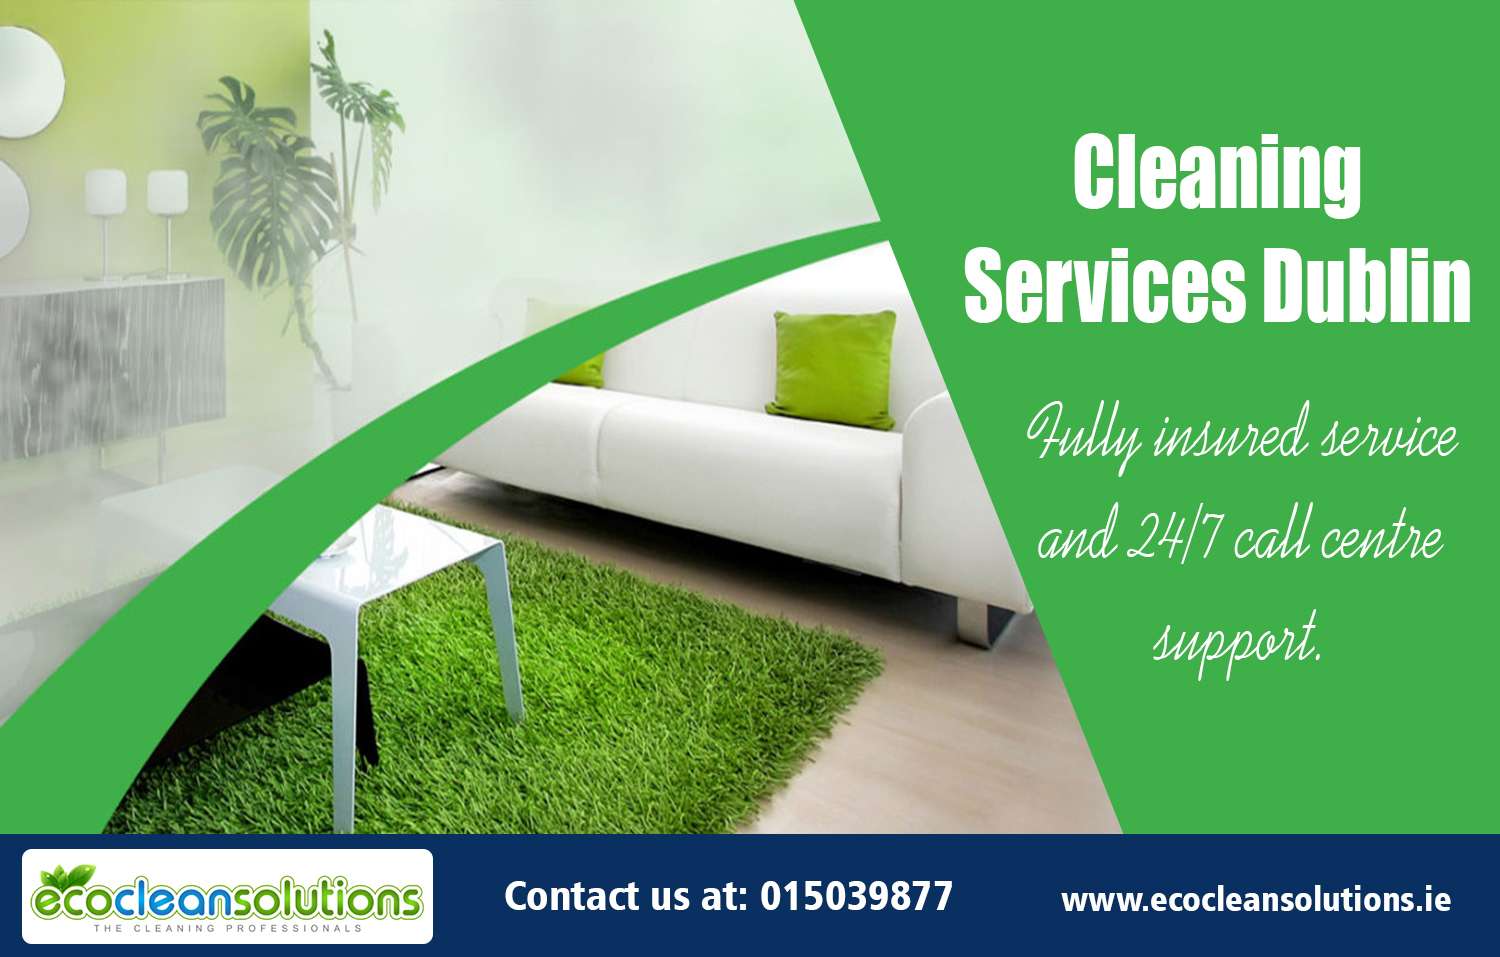 Carpet Cleaning Services Prices Dublin